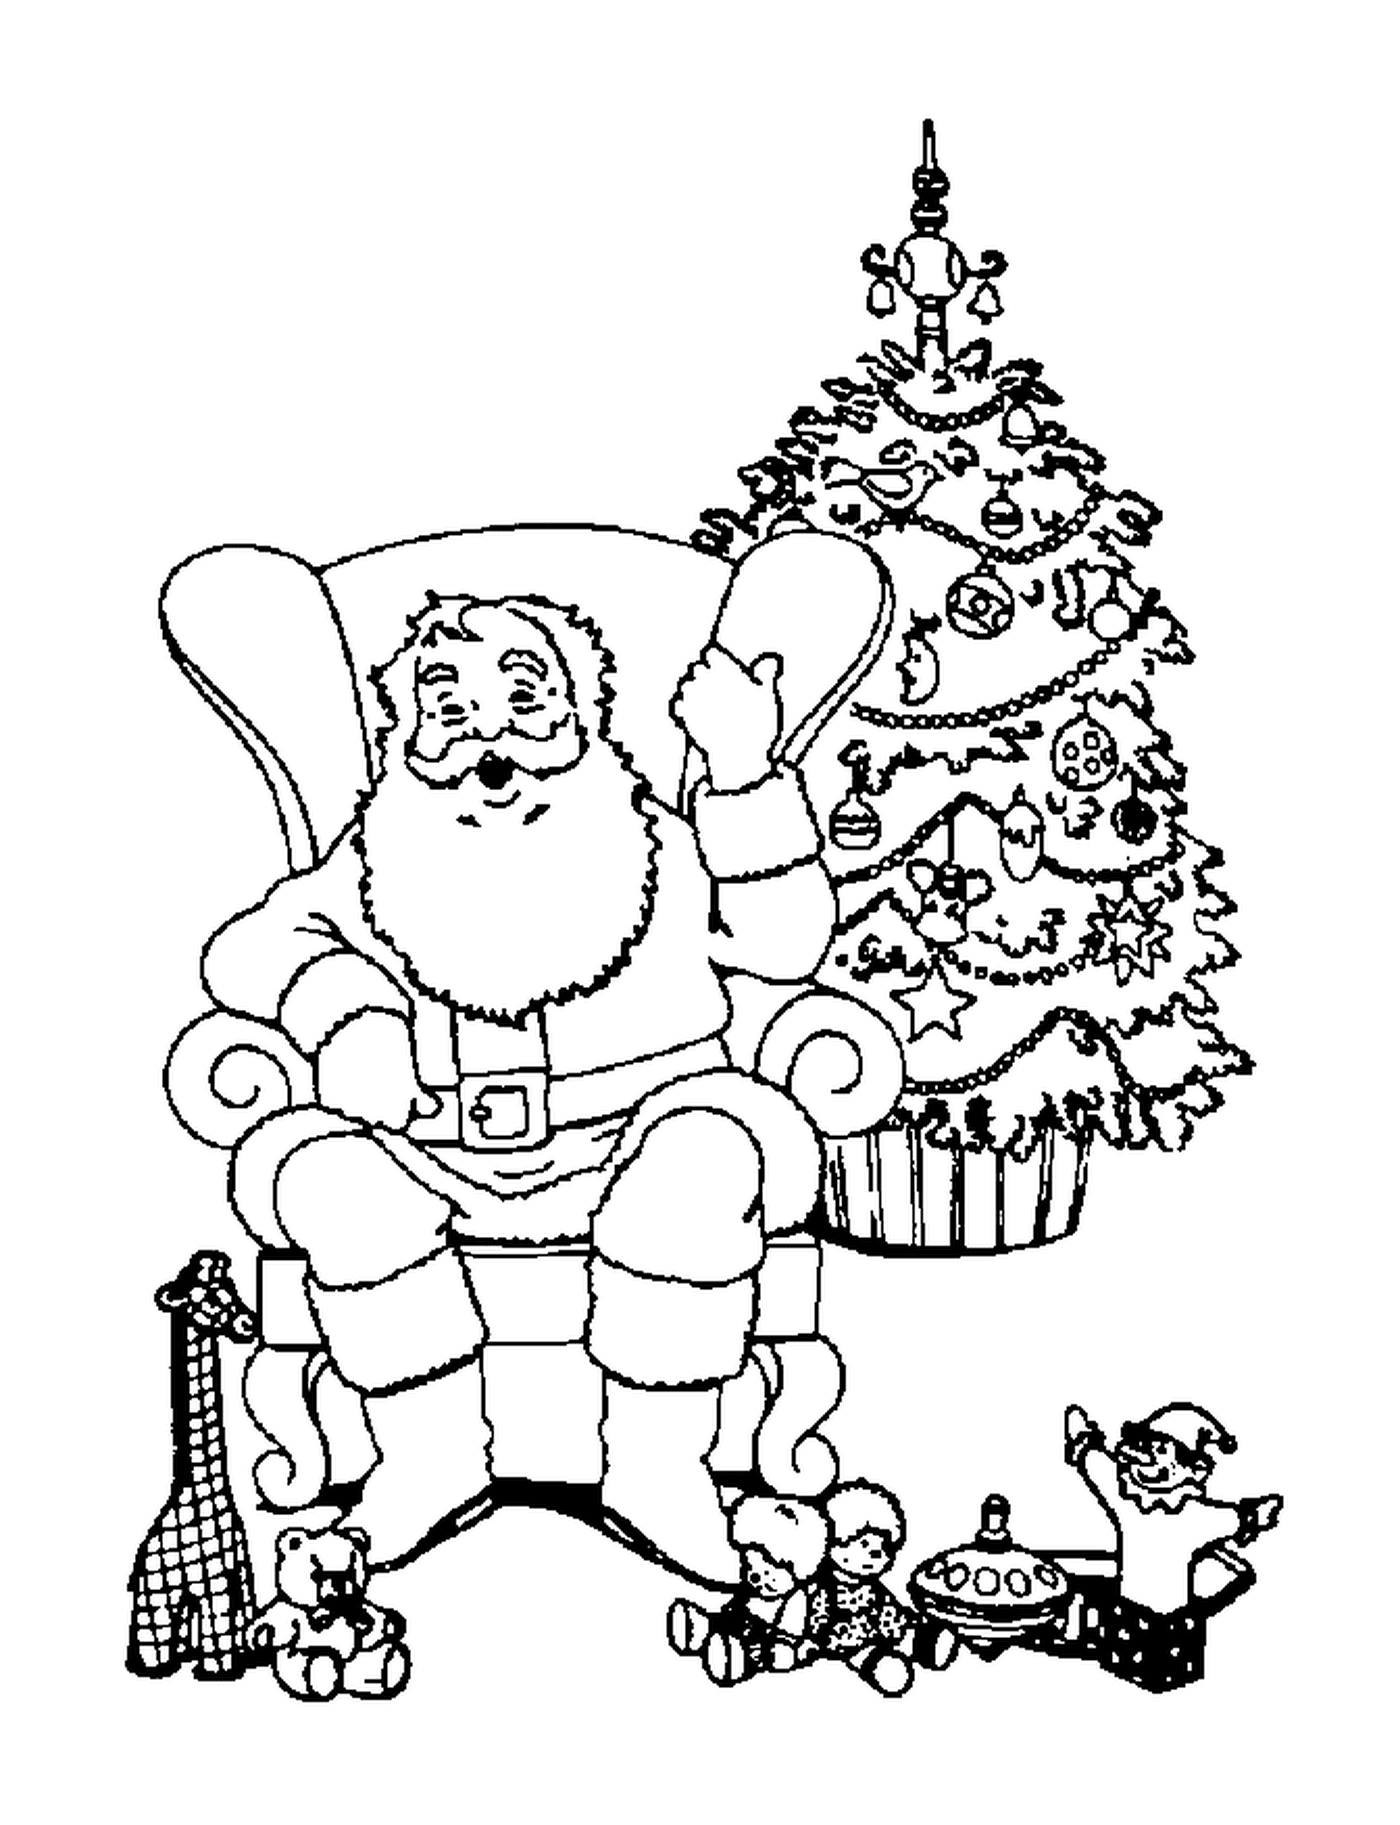  a Santa sitting in a chair by a Christmas tree 